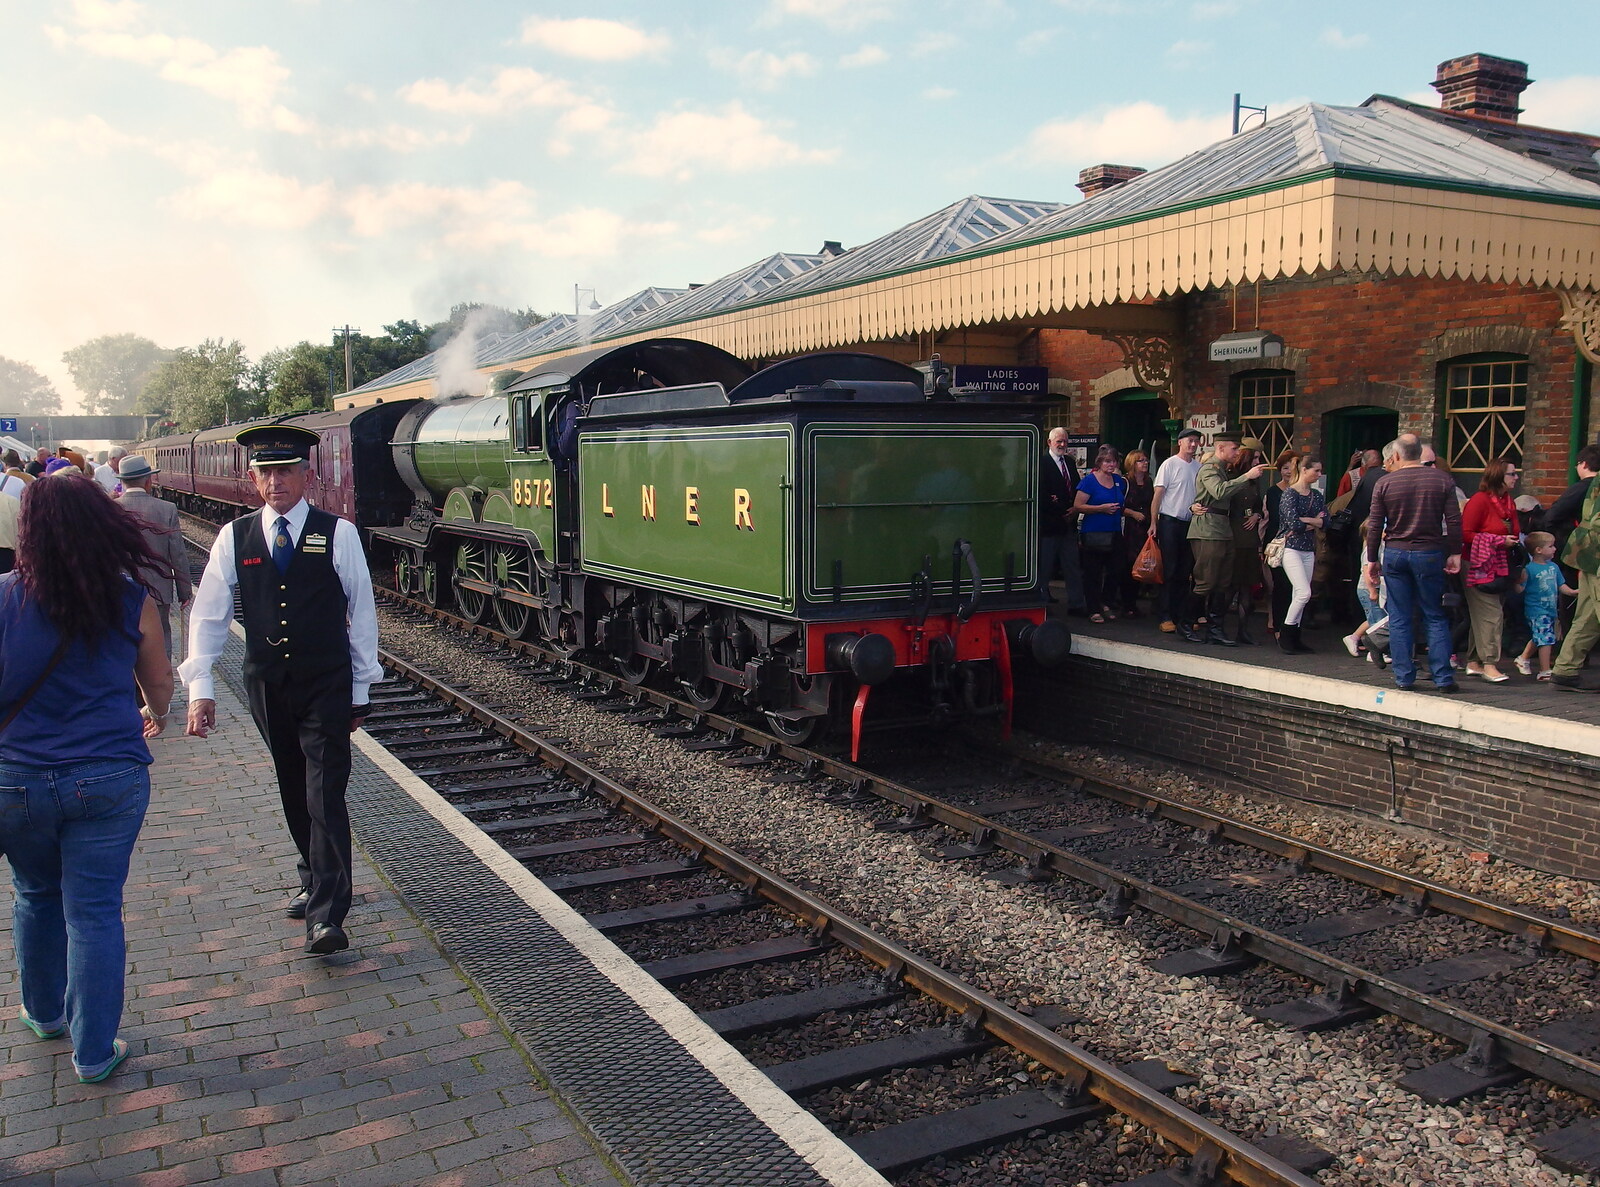 LNER Class B12 8572 at Sheringham from Paul Bear's Adventures at a 1940s Steam Weekend, Holt, Norfolk - 22nd September 2013